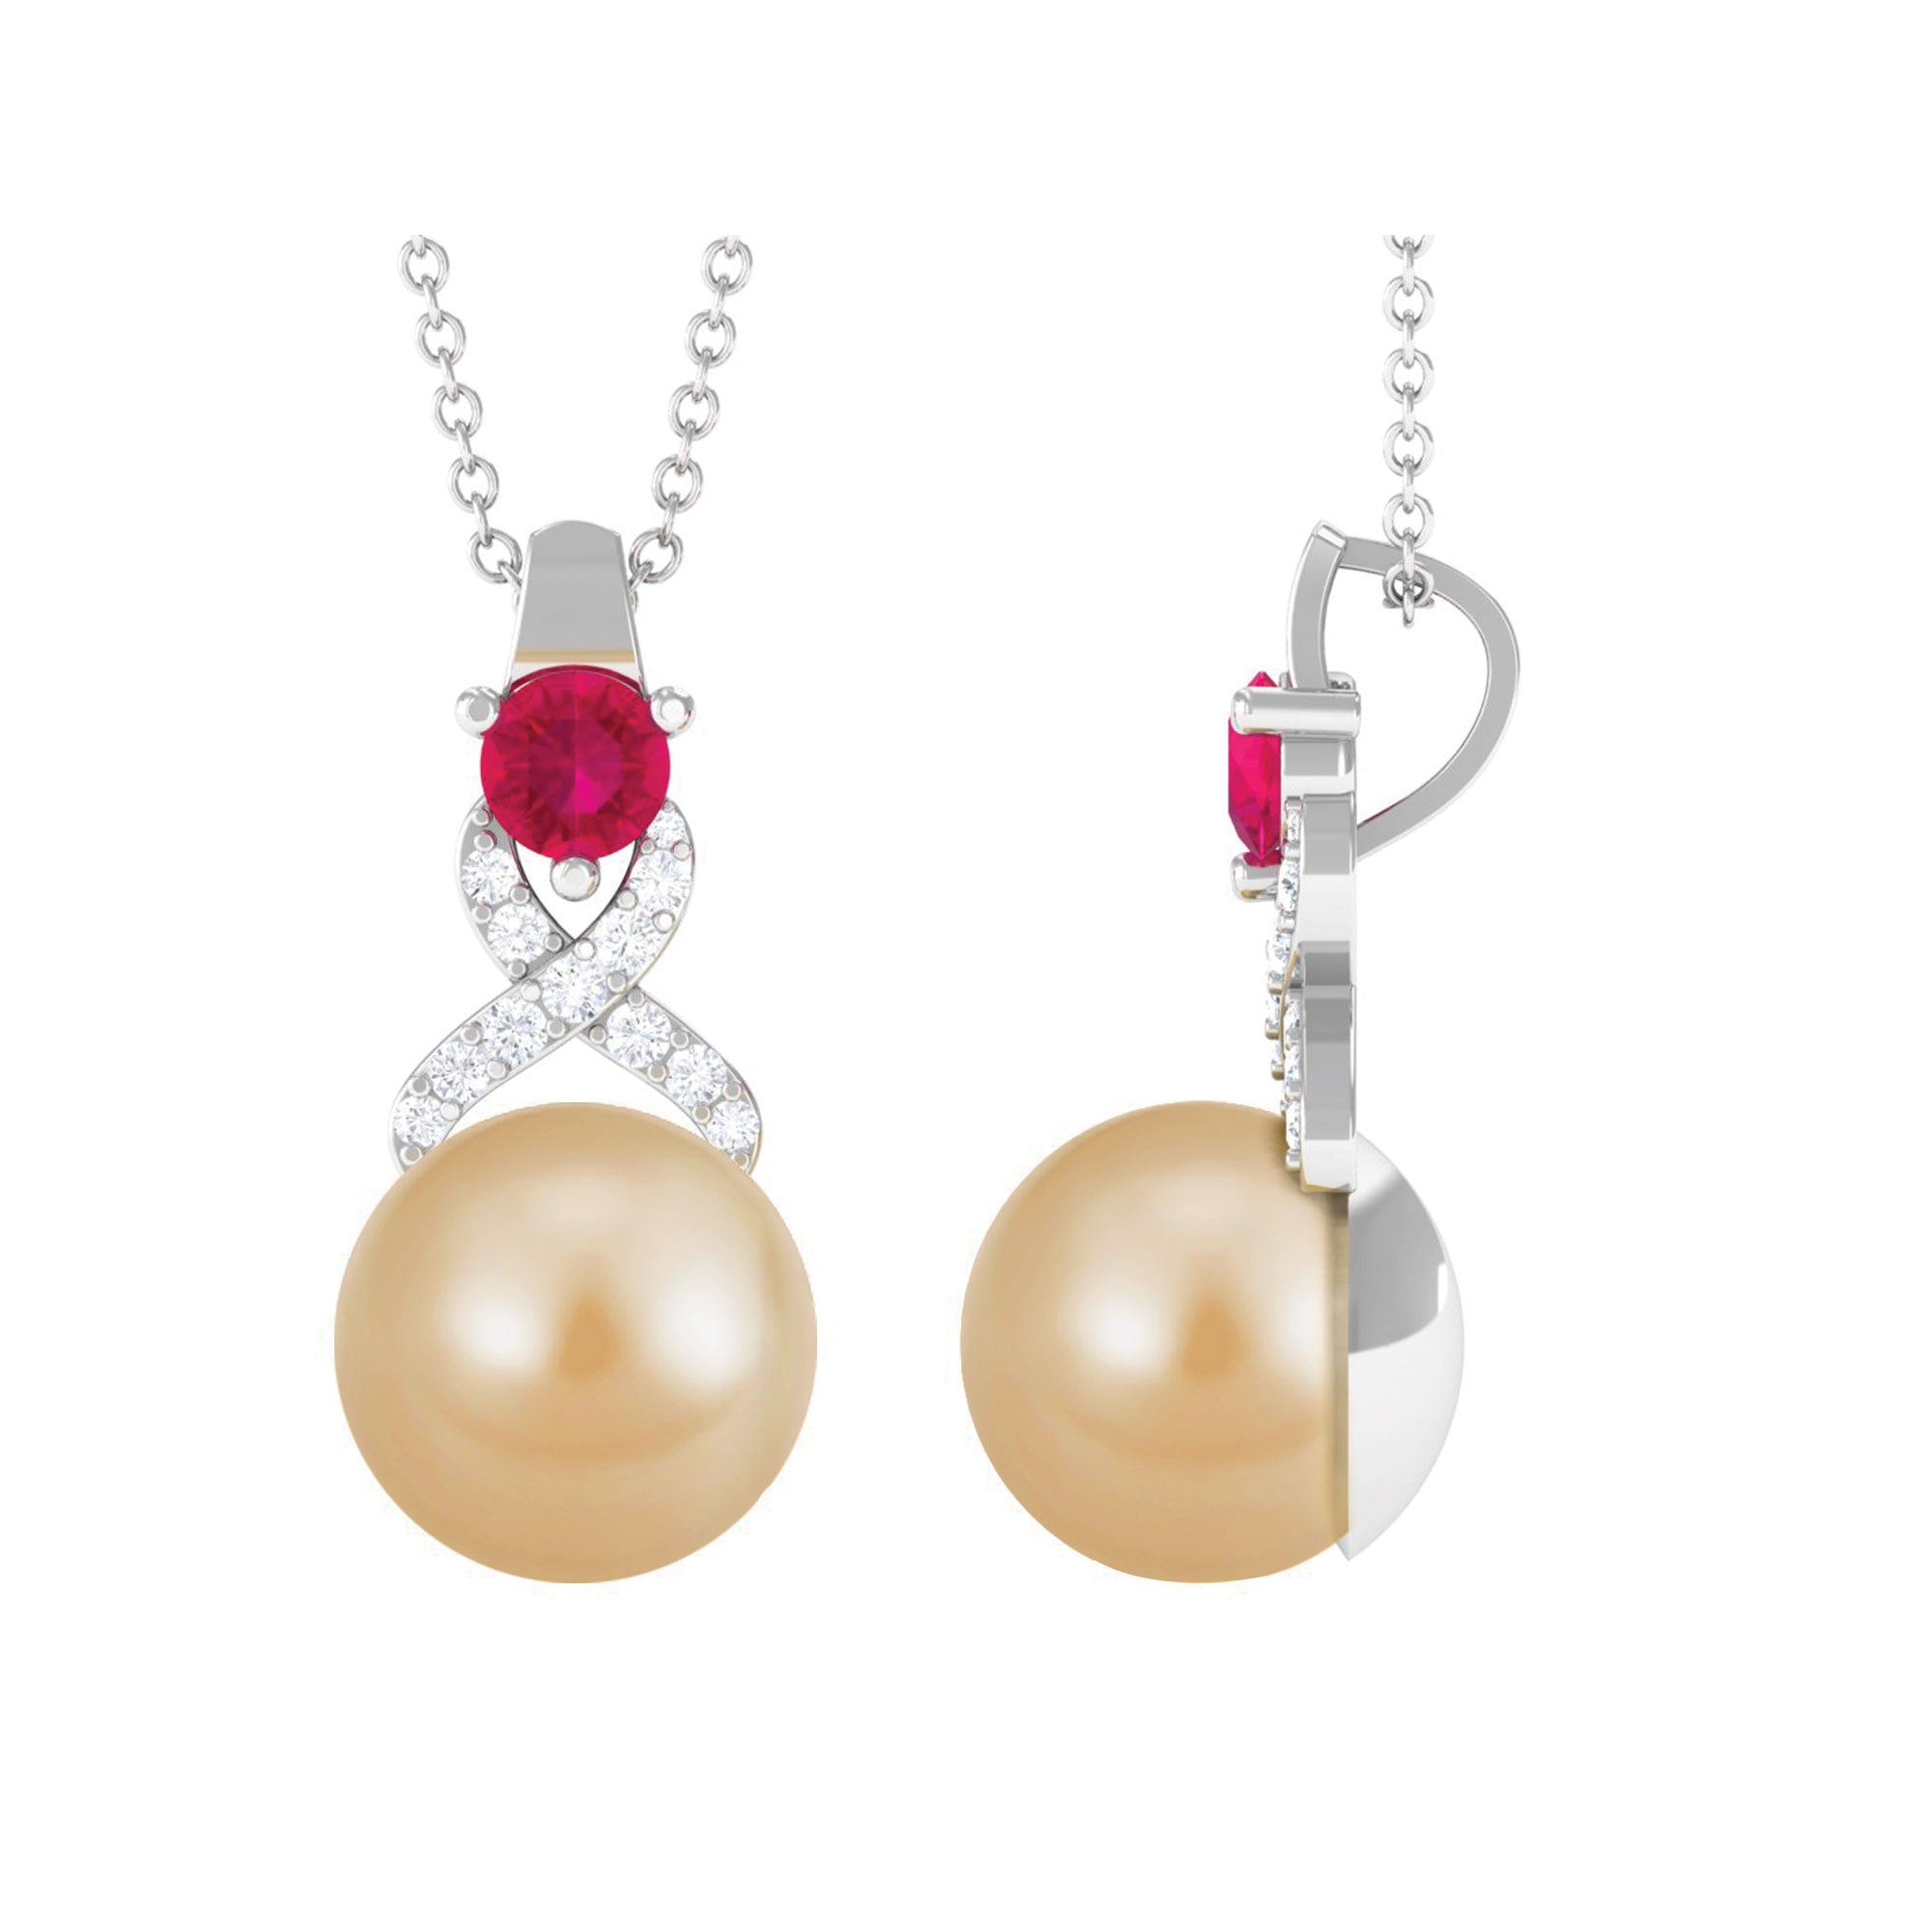 South Sea Pearl Pendant Necklace with Ruby and Diamond South Sea Pearl-AAA Quality - Arisha Jewels